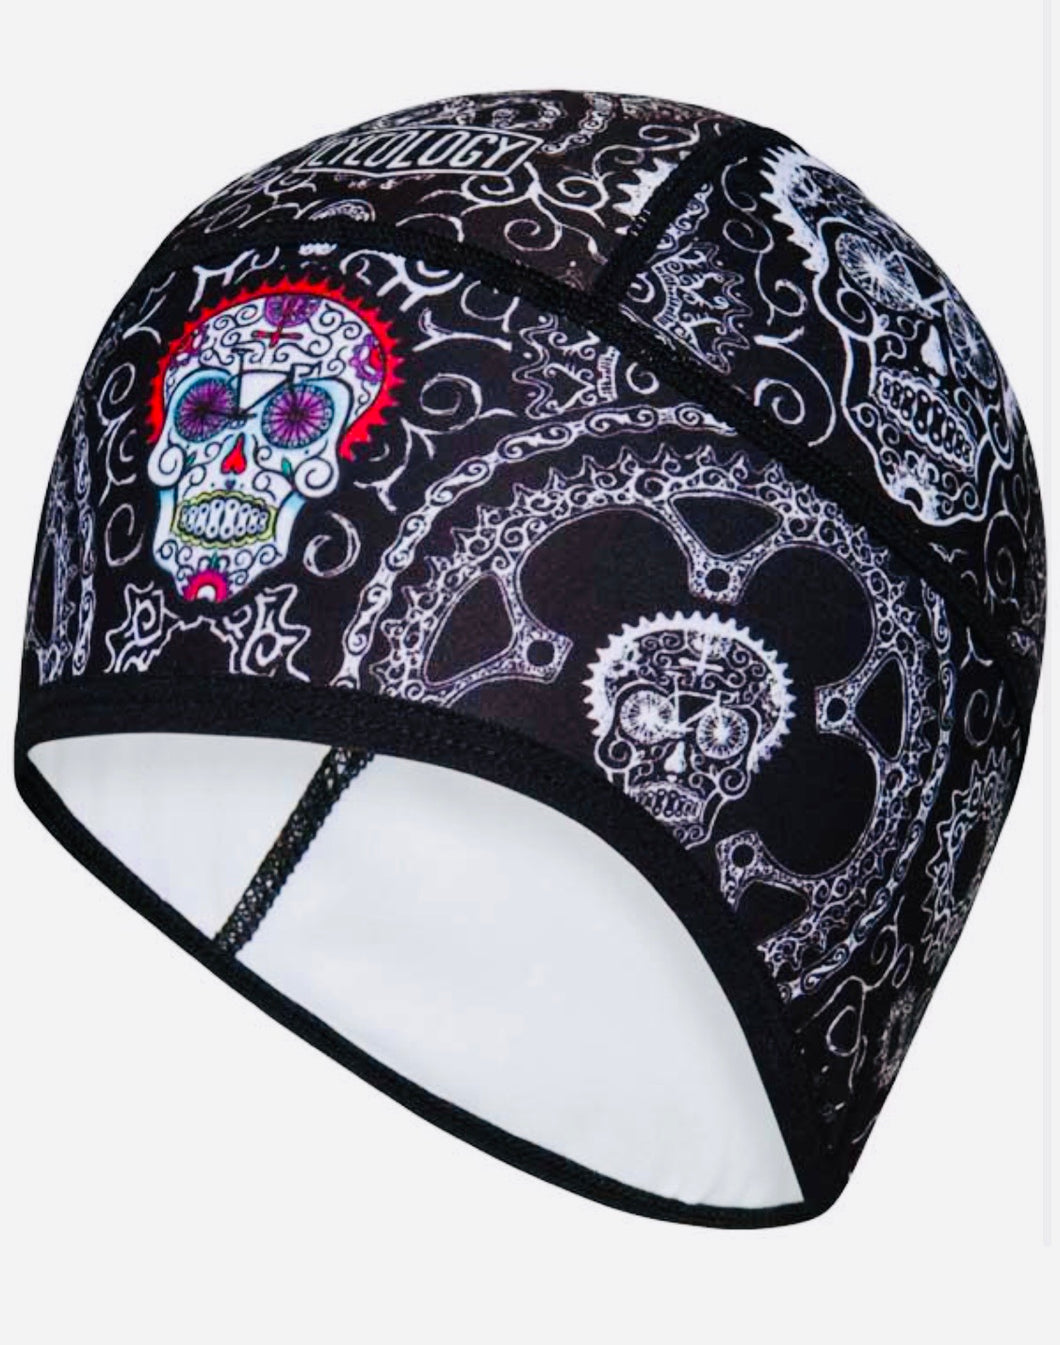 Cycology Unisex Thermal Cycling Beanie. Design Day of the Dead.